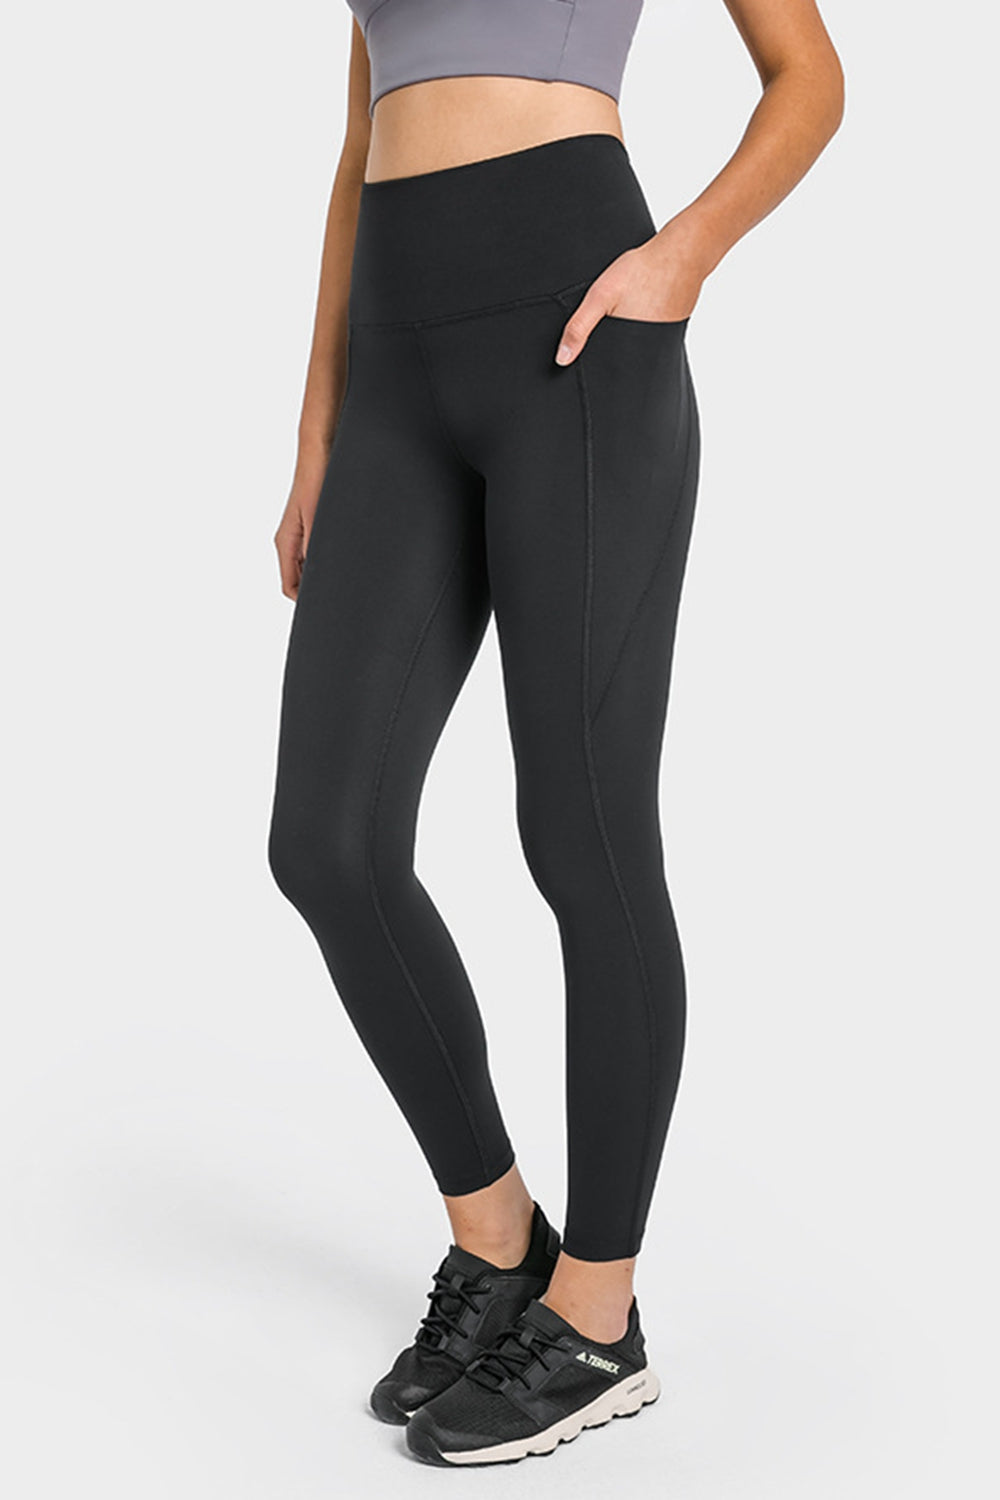 Clothing & Shoes - Bottoms - Leggings - Mr. Max Hollywood Legging With  Hidden Waistband - Online Shopping for Canadians